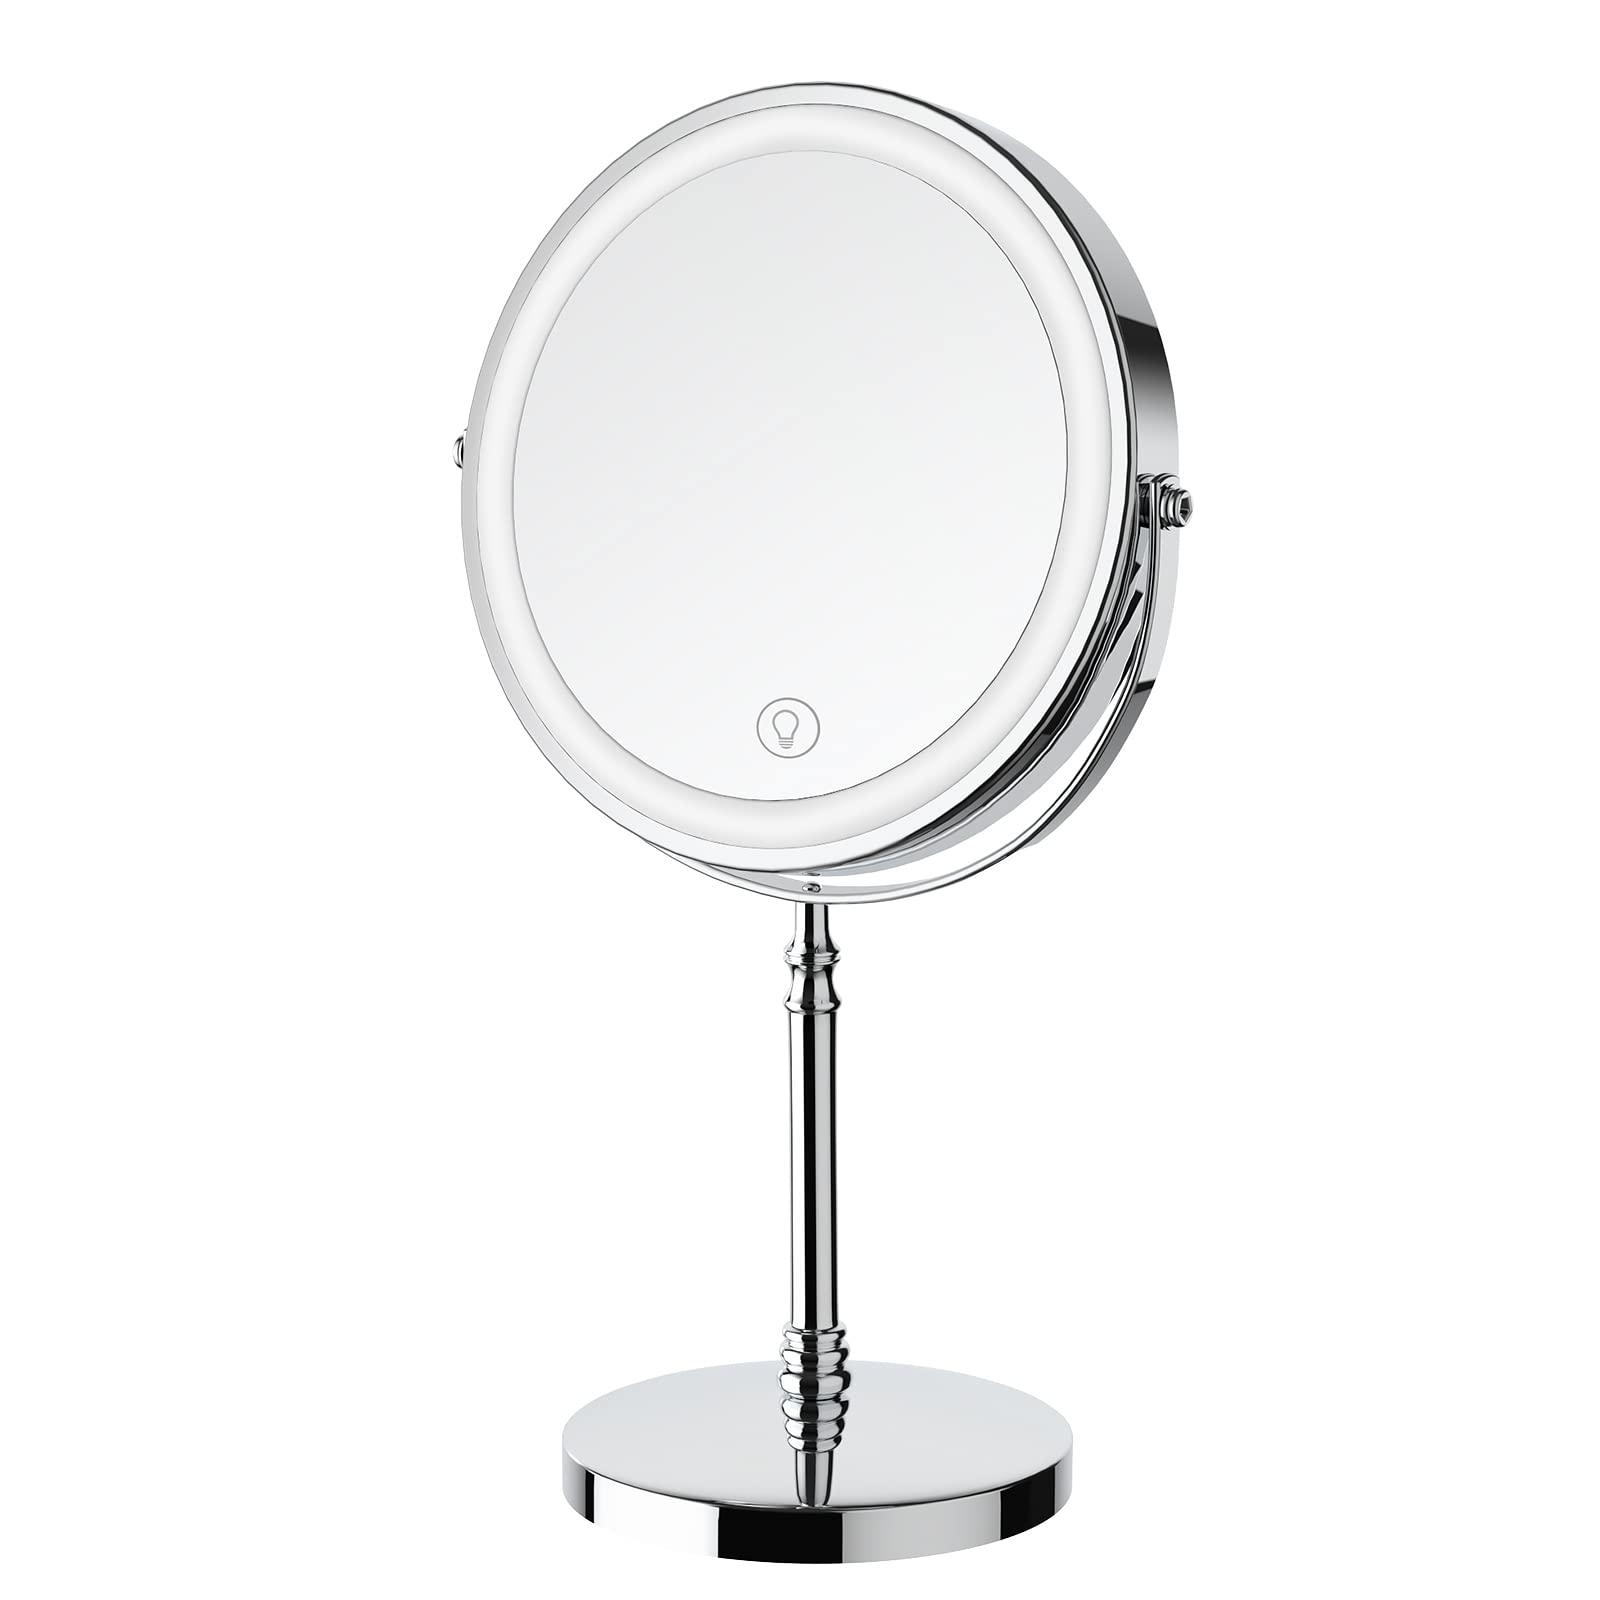 DEIOVWXS lighted makeup mirror, 8" rechargeable double sided magnifying mirror with 3 colors, 1x/10x 360 rotation touch screen vanity 